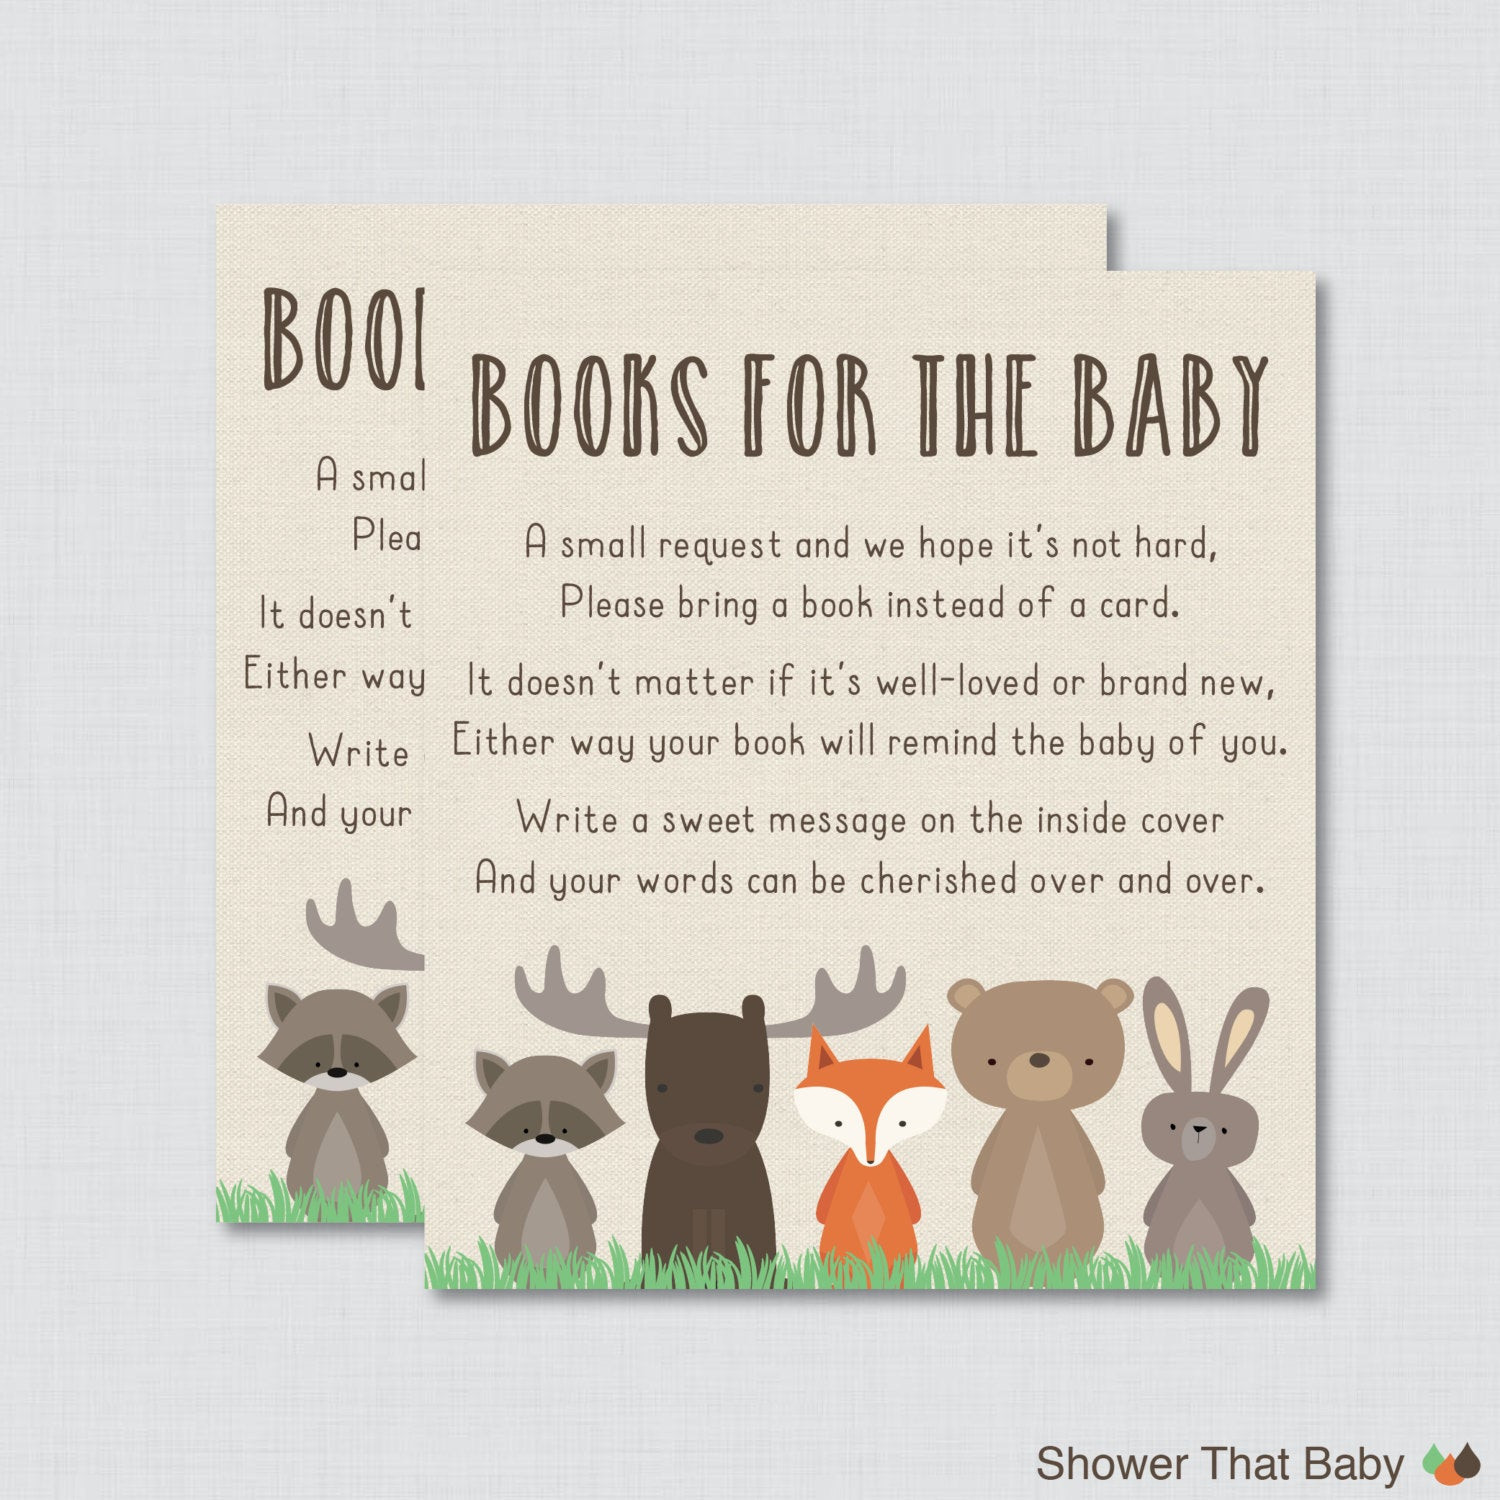 Quote For Baby Shower Book
 Woodland Baby Shower Bring a Book Instead of a Card Invitation